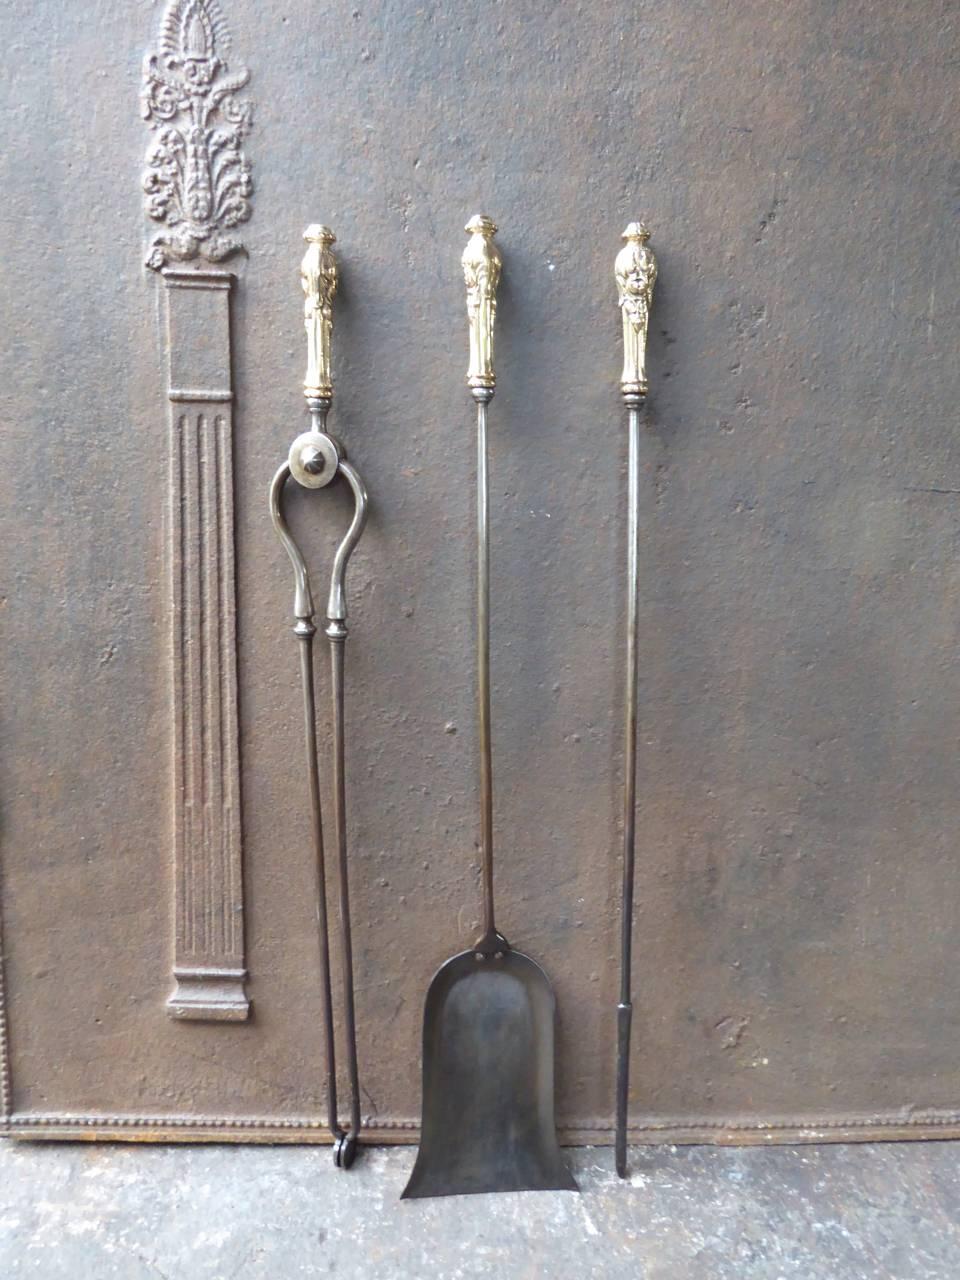 19th century English fireplace toolset made of wrought iron and polished brass.

We have a unique and specialized collection of antique and used fireplace accessories consisting of more than 1000 listings at 1stdibs. Amongst others, we always have